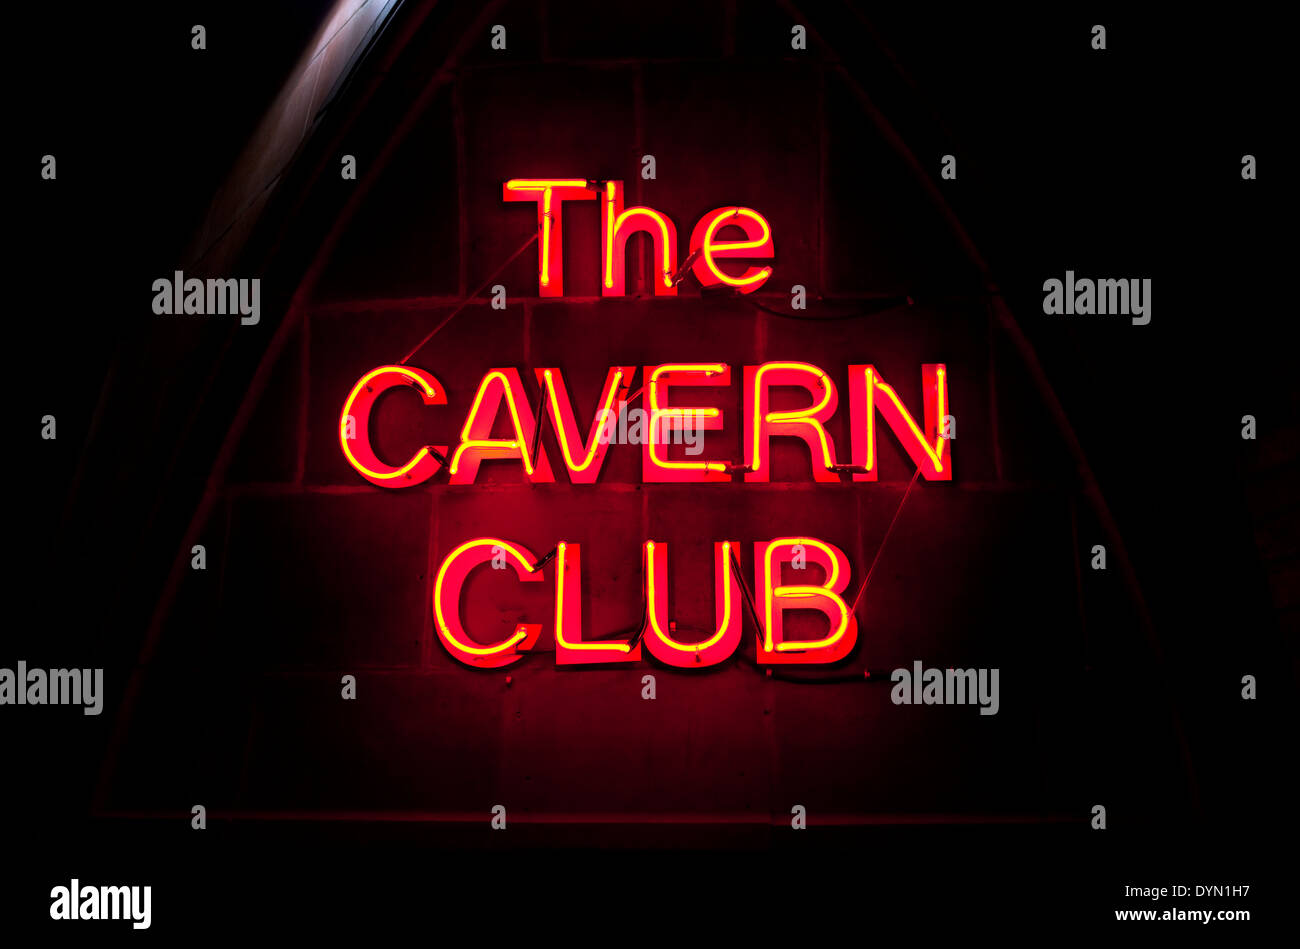 The historic Cavern Club in Liverpool. One of the venues in which 'The Beatles' started their career. Stock Photo